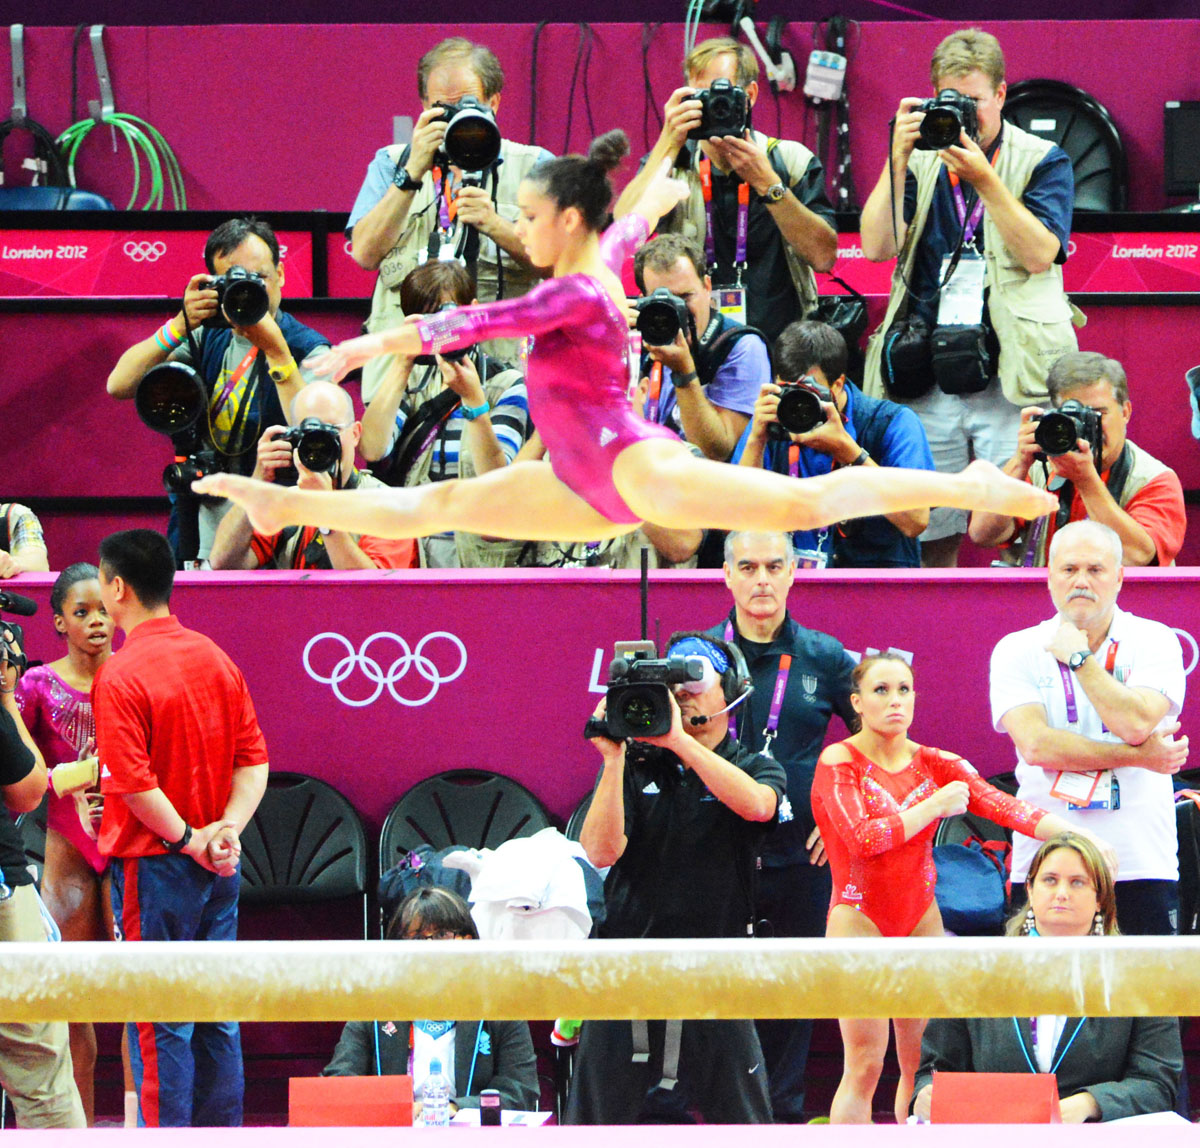 USA gymnist Aly Raisman competes on the beam during the 2012 Summer Olympics in London England. Aly Reisman on the beam